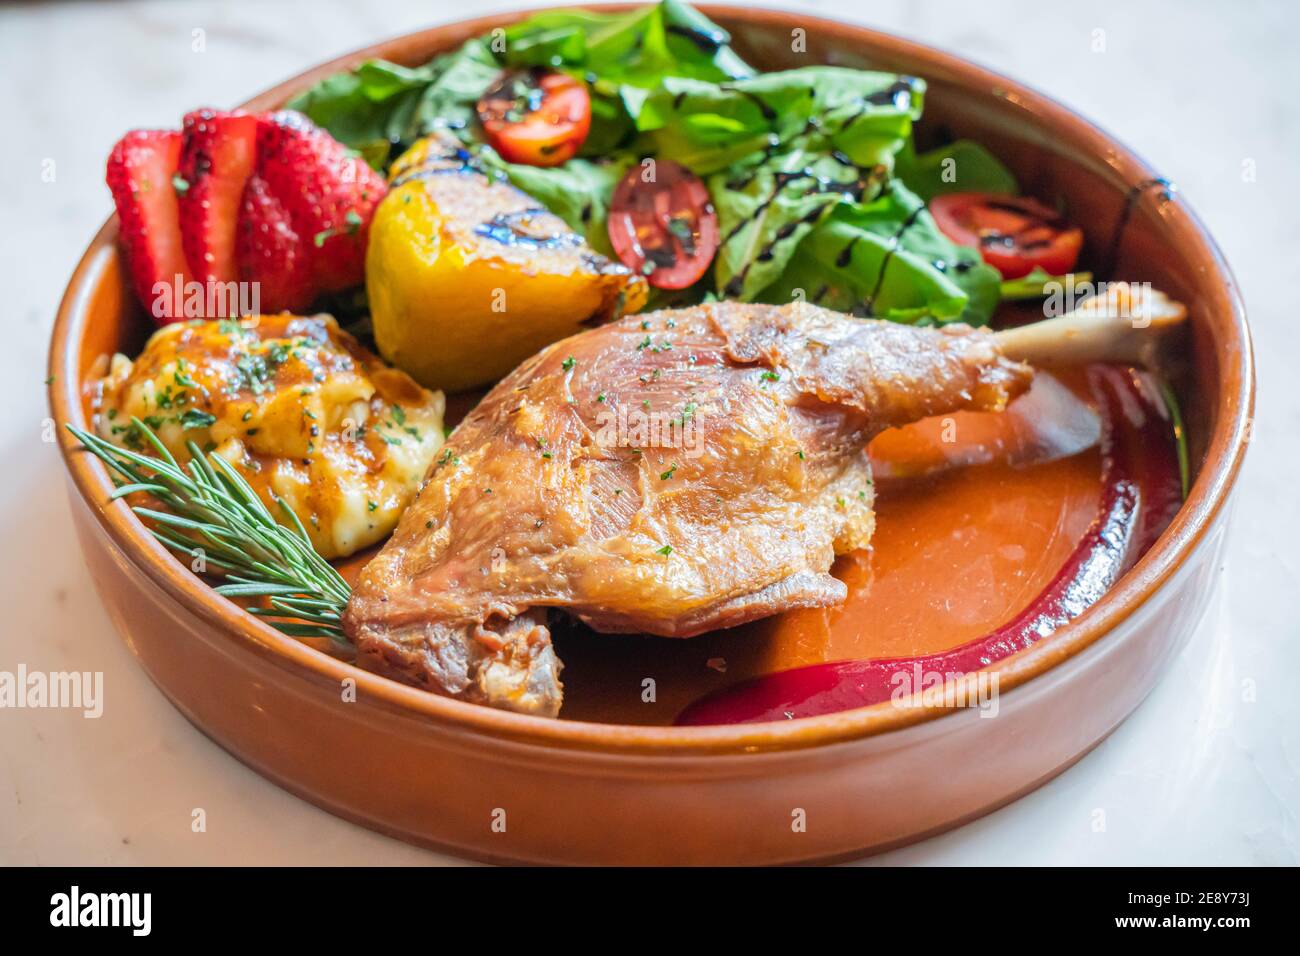 Hot fried chicken legs with grilled pineapple and Strawberry,Tomato with vegetable Stock Photo